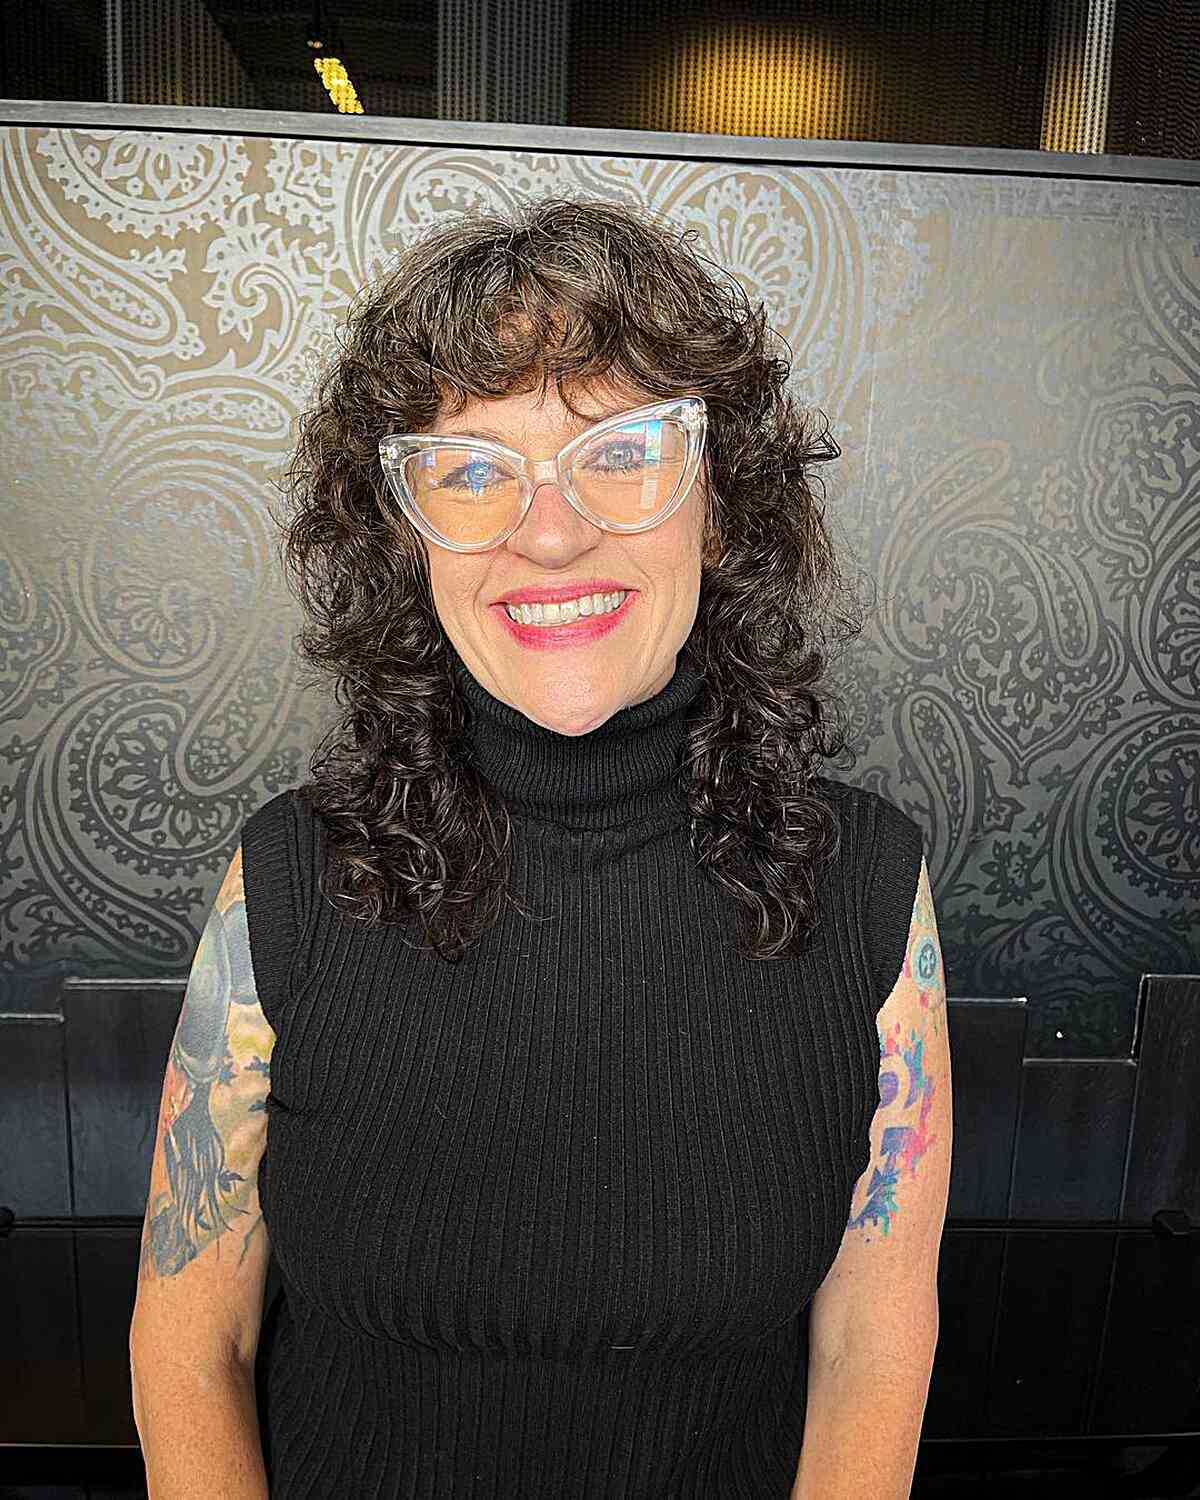 Medium-Length Curled Shag and Bangs for Women Wearing Glasses in Their Sixties